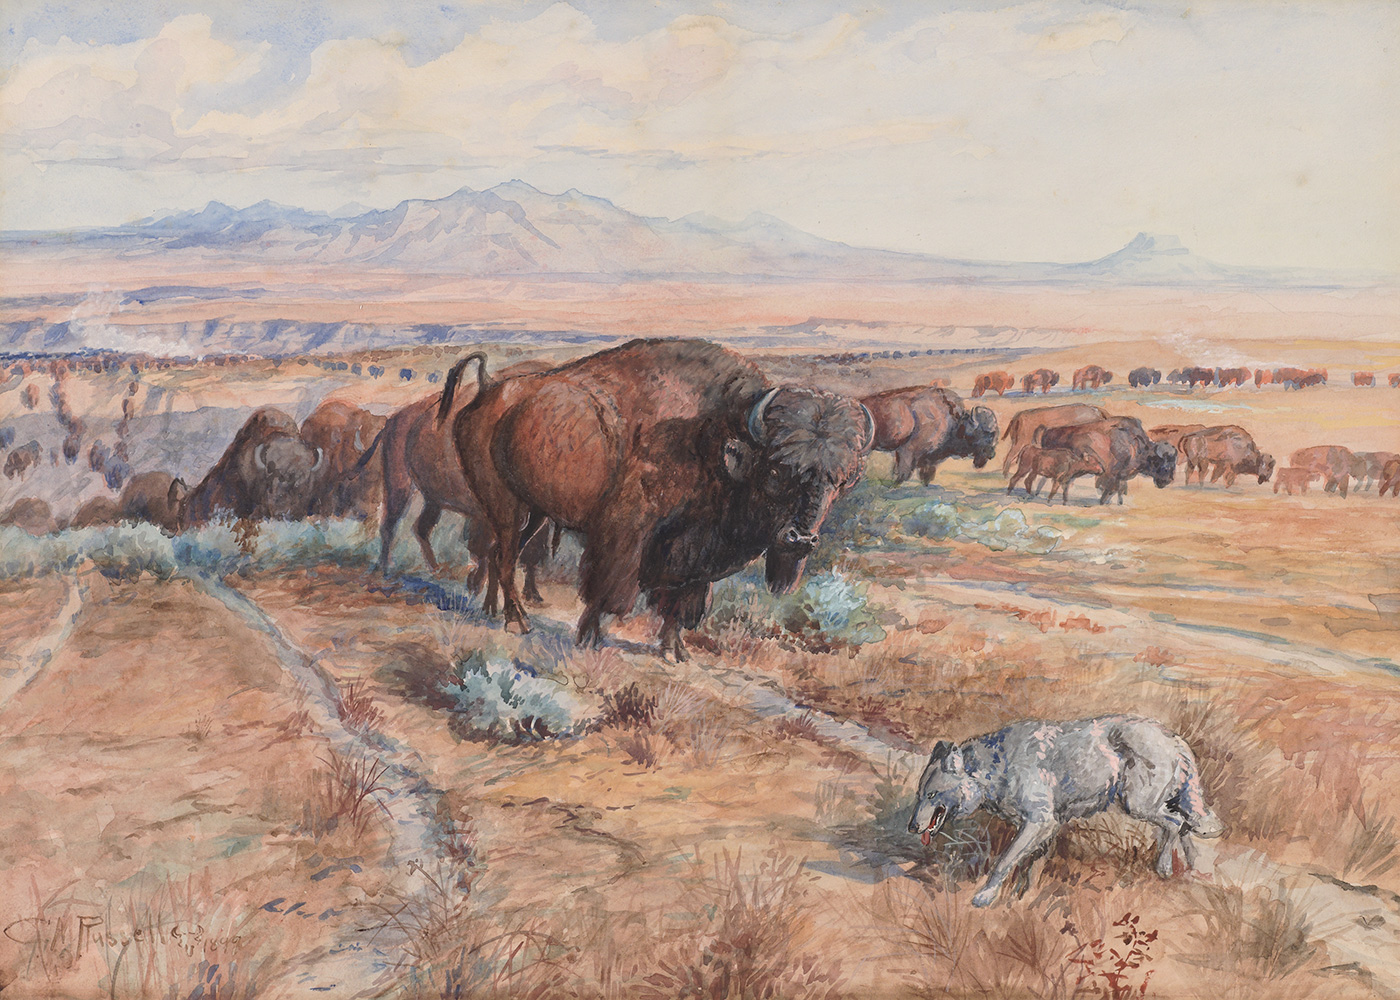 A herd of bison move across a landscape with a wolf in the foreground.